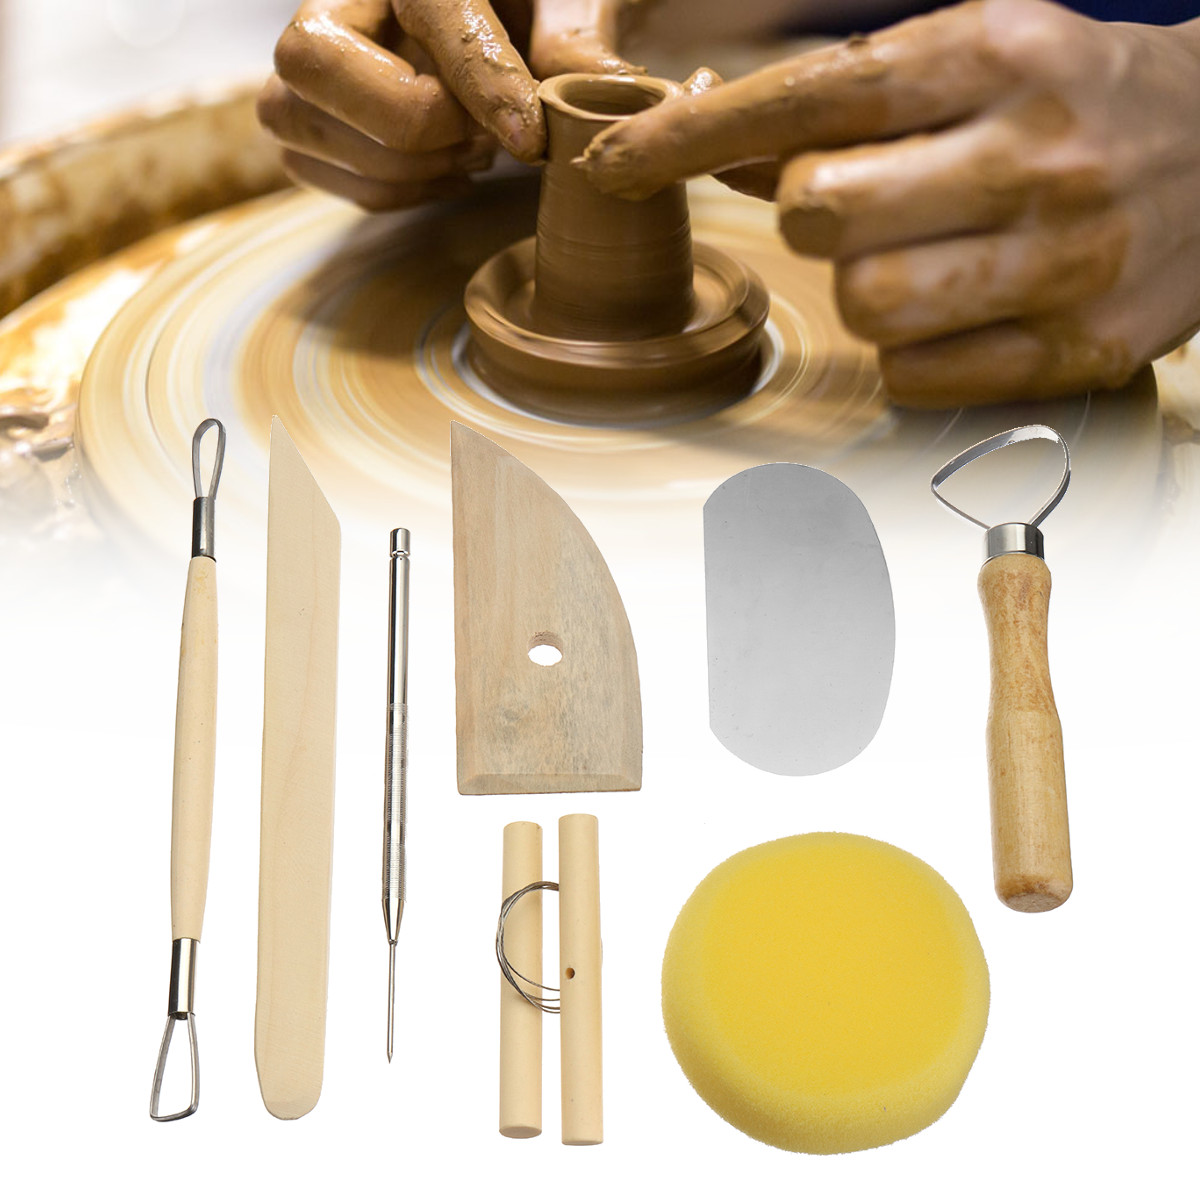 

8Pcs Clay Sculpting Set Wax Carving Pottery Tool Shapers Polymer Modeling Ceramic